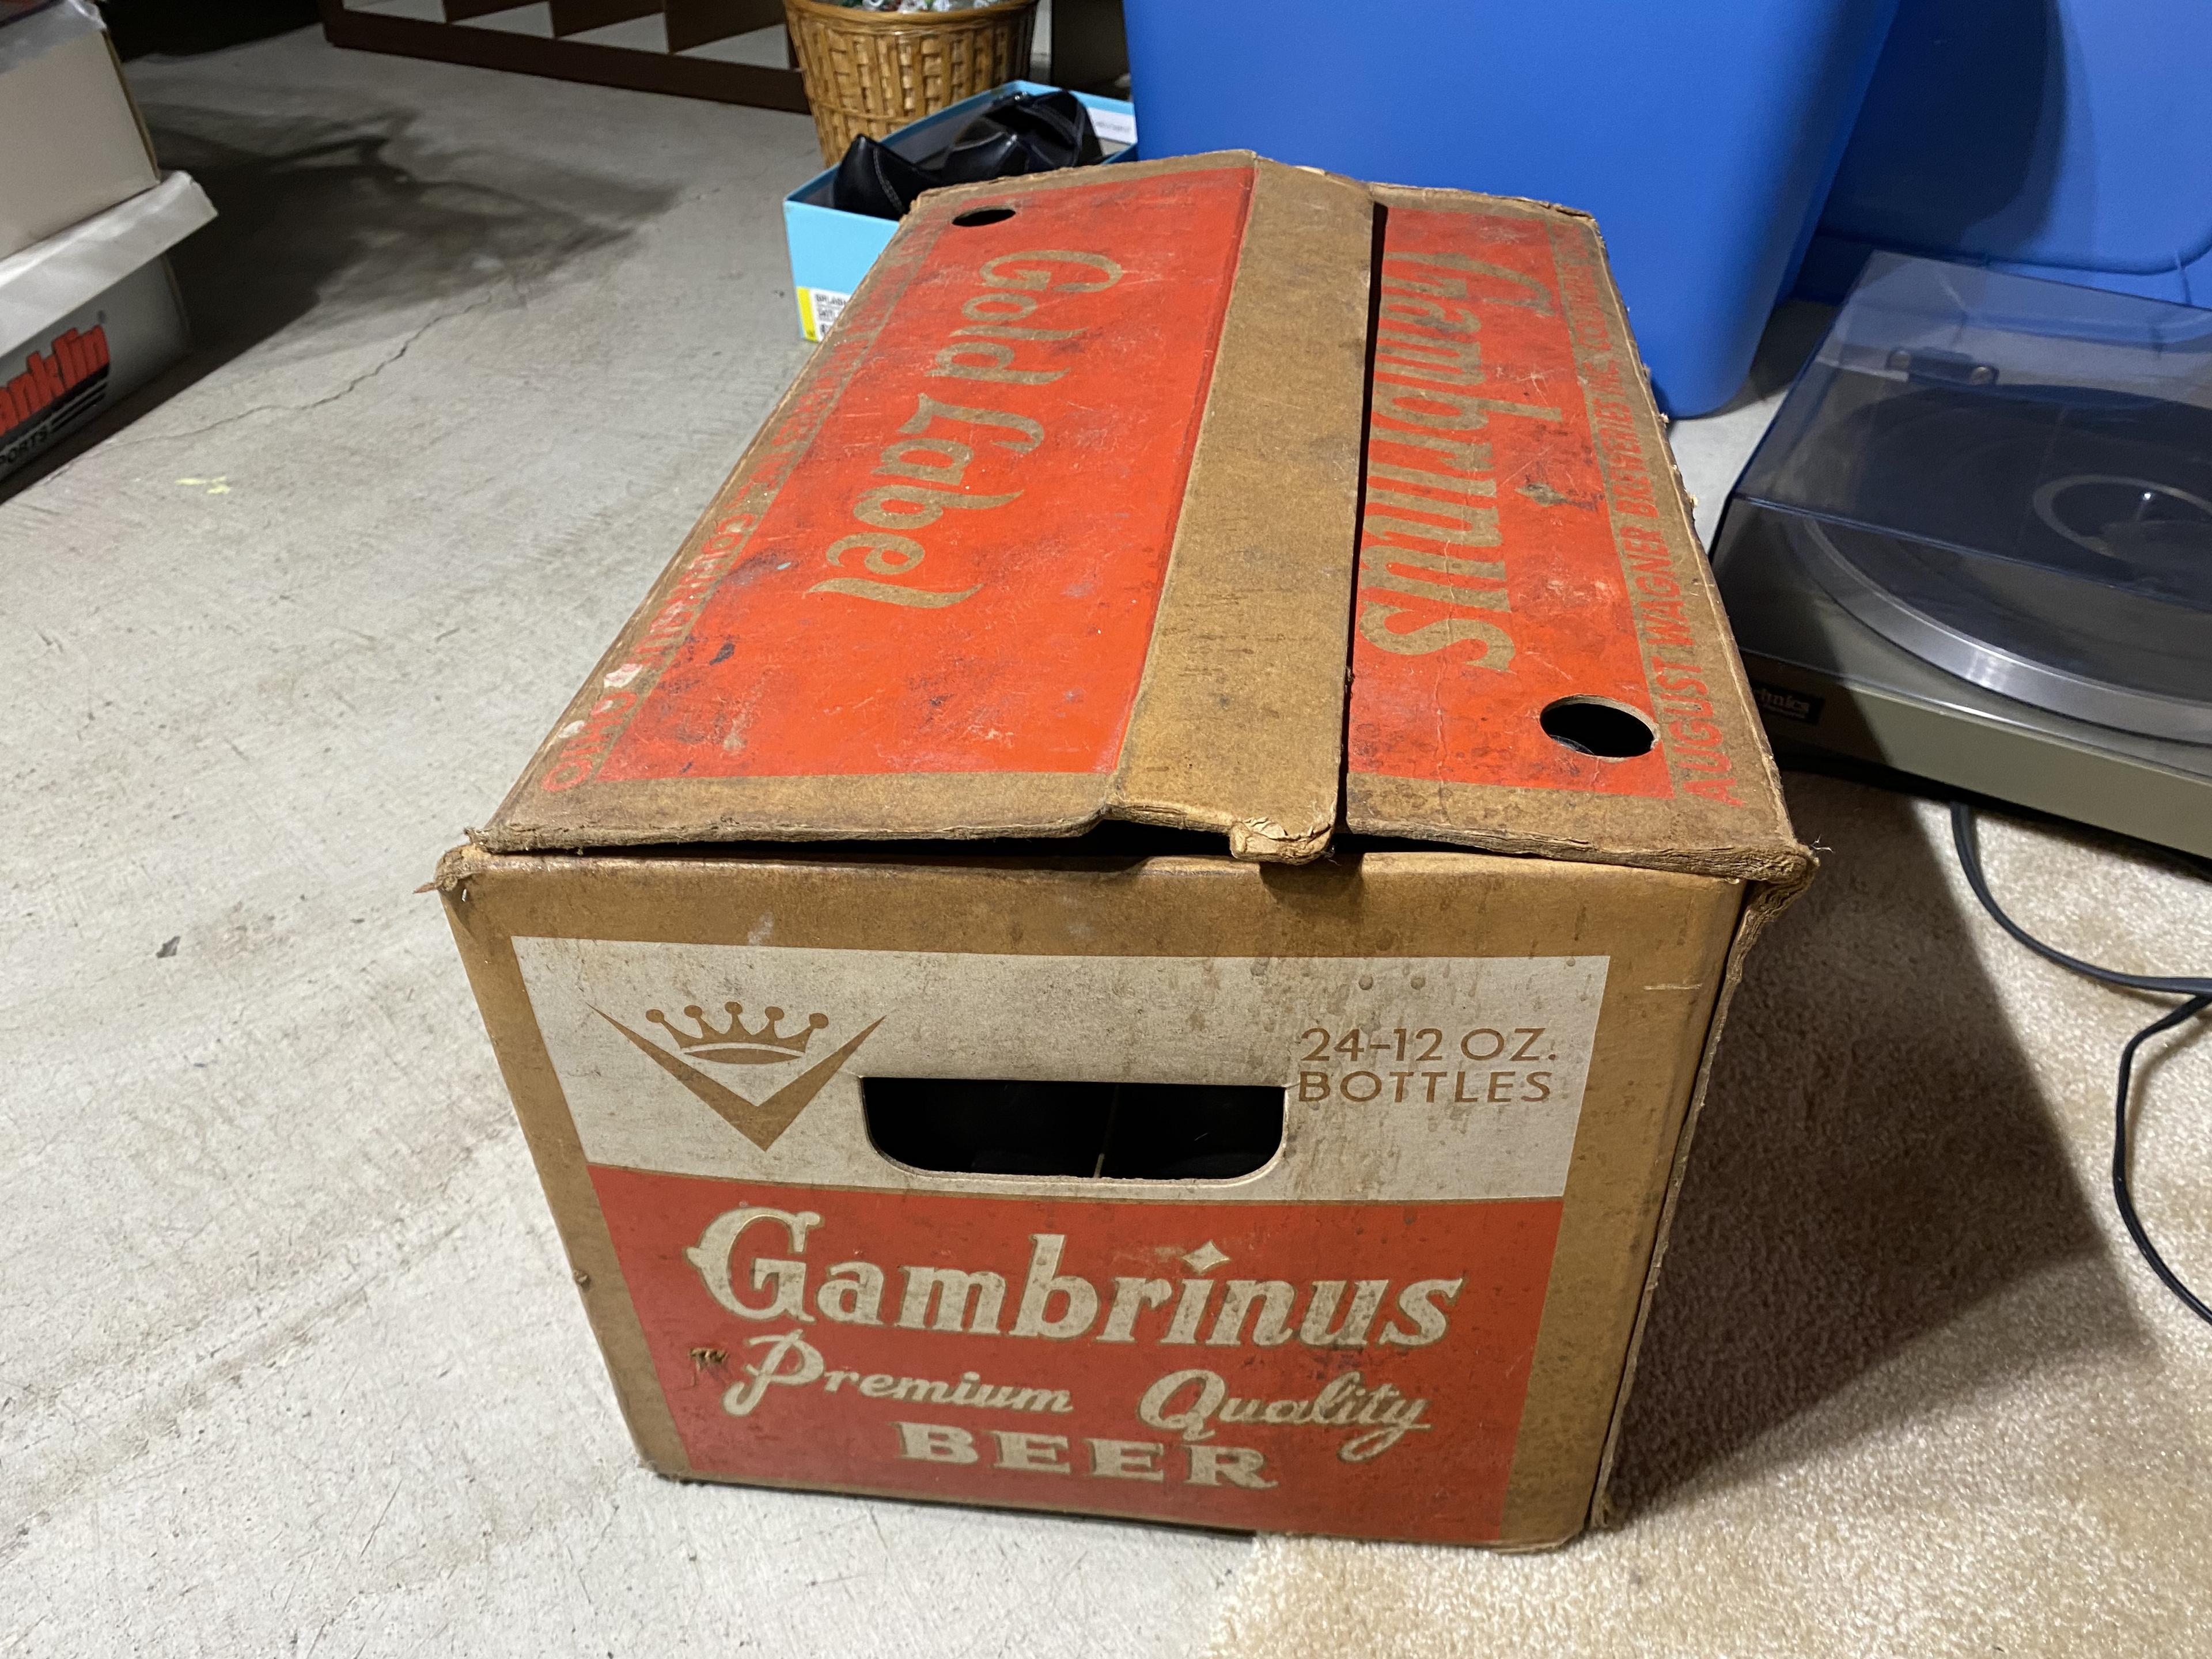 Gambrinus Gold Label Beer Box with Bottles